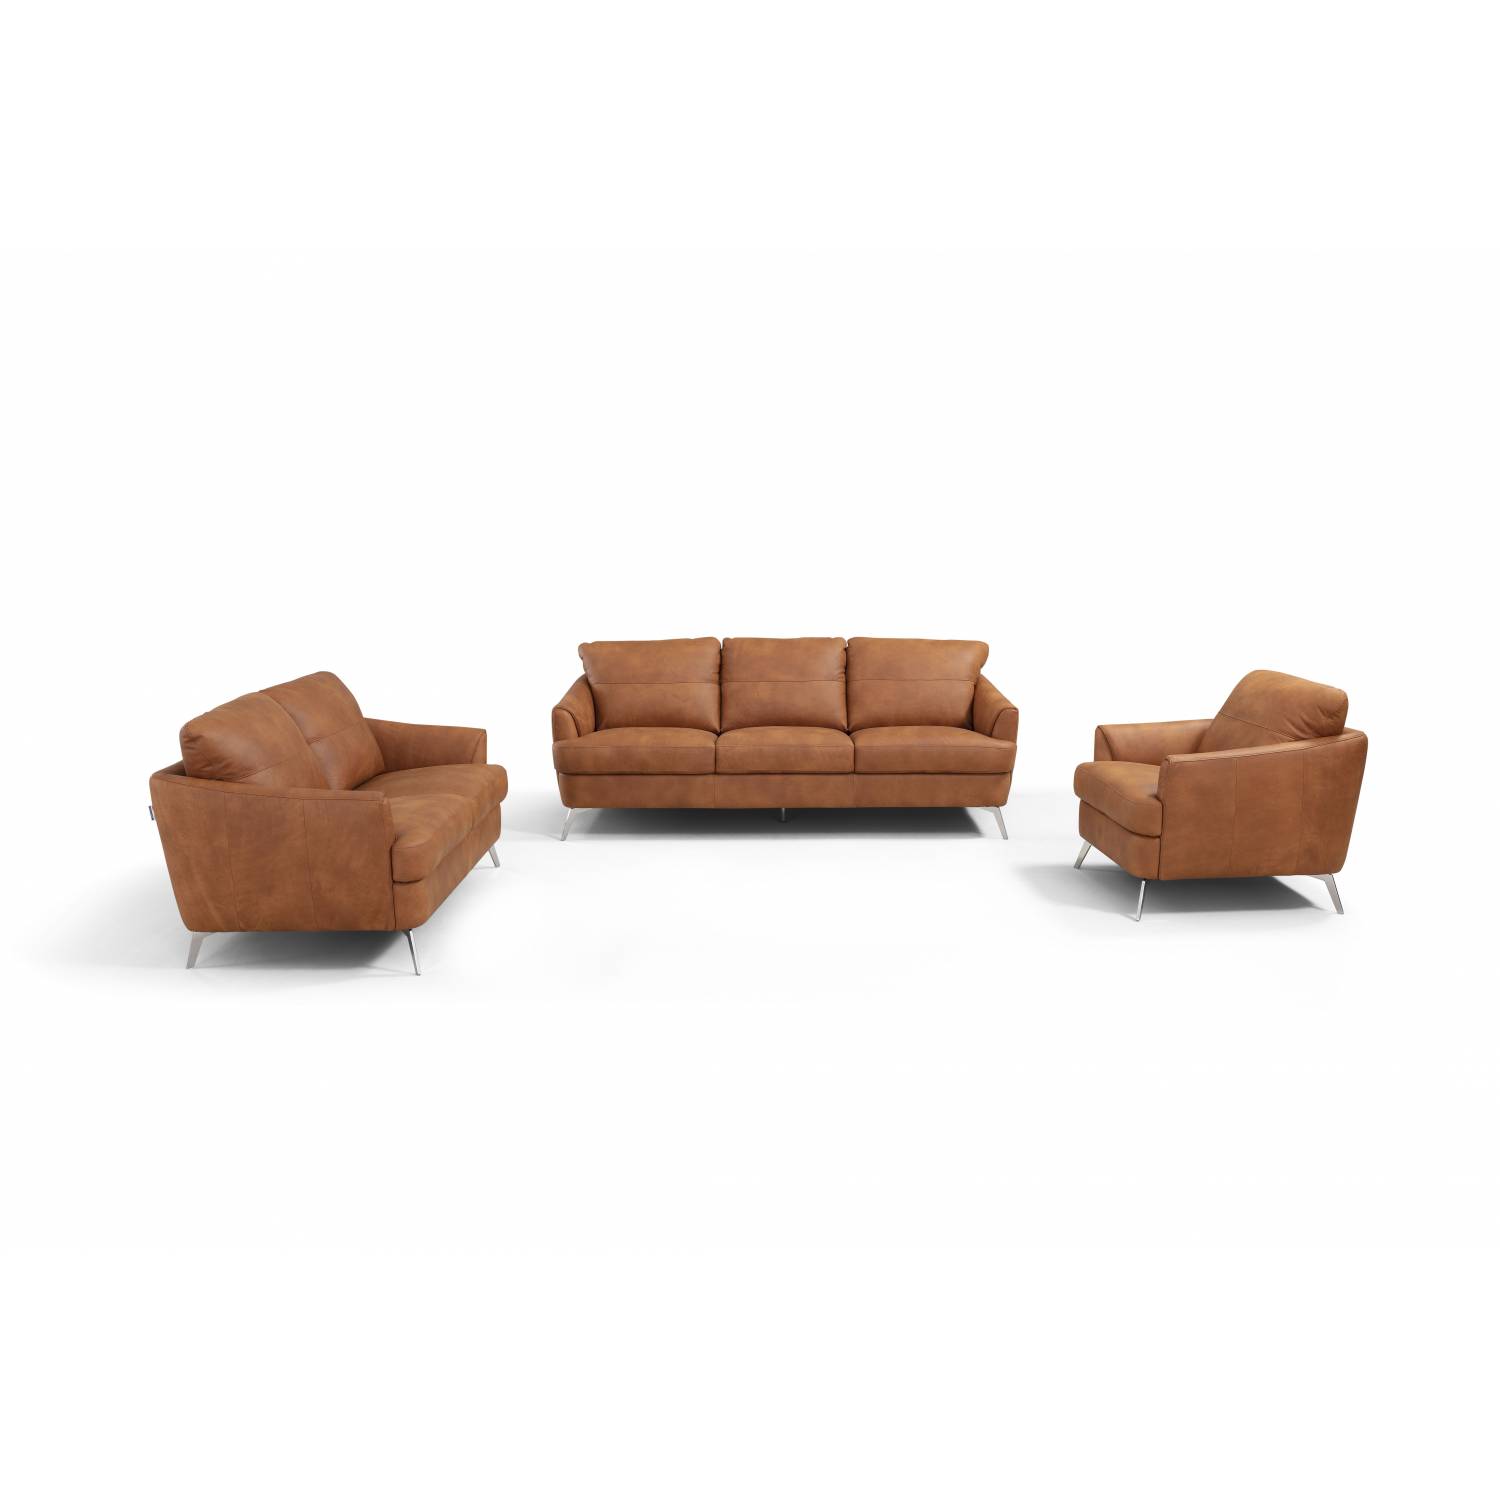 Louis Vuitton Loveseat, Chairs, and Lamp Set - furniture - by